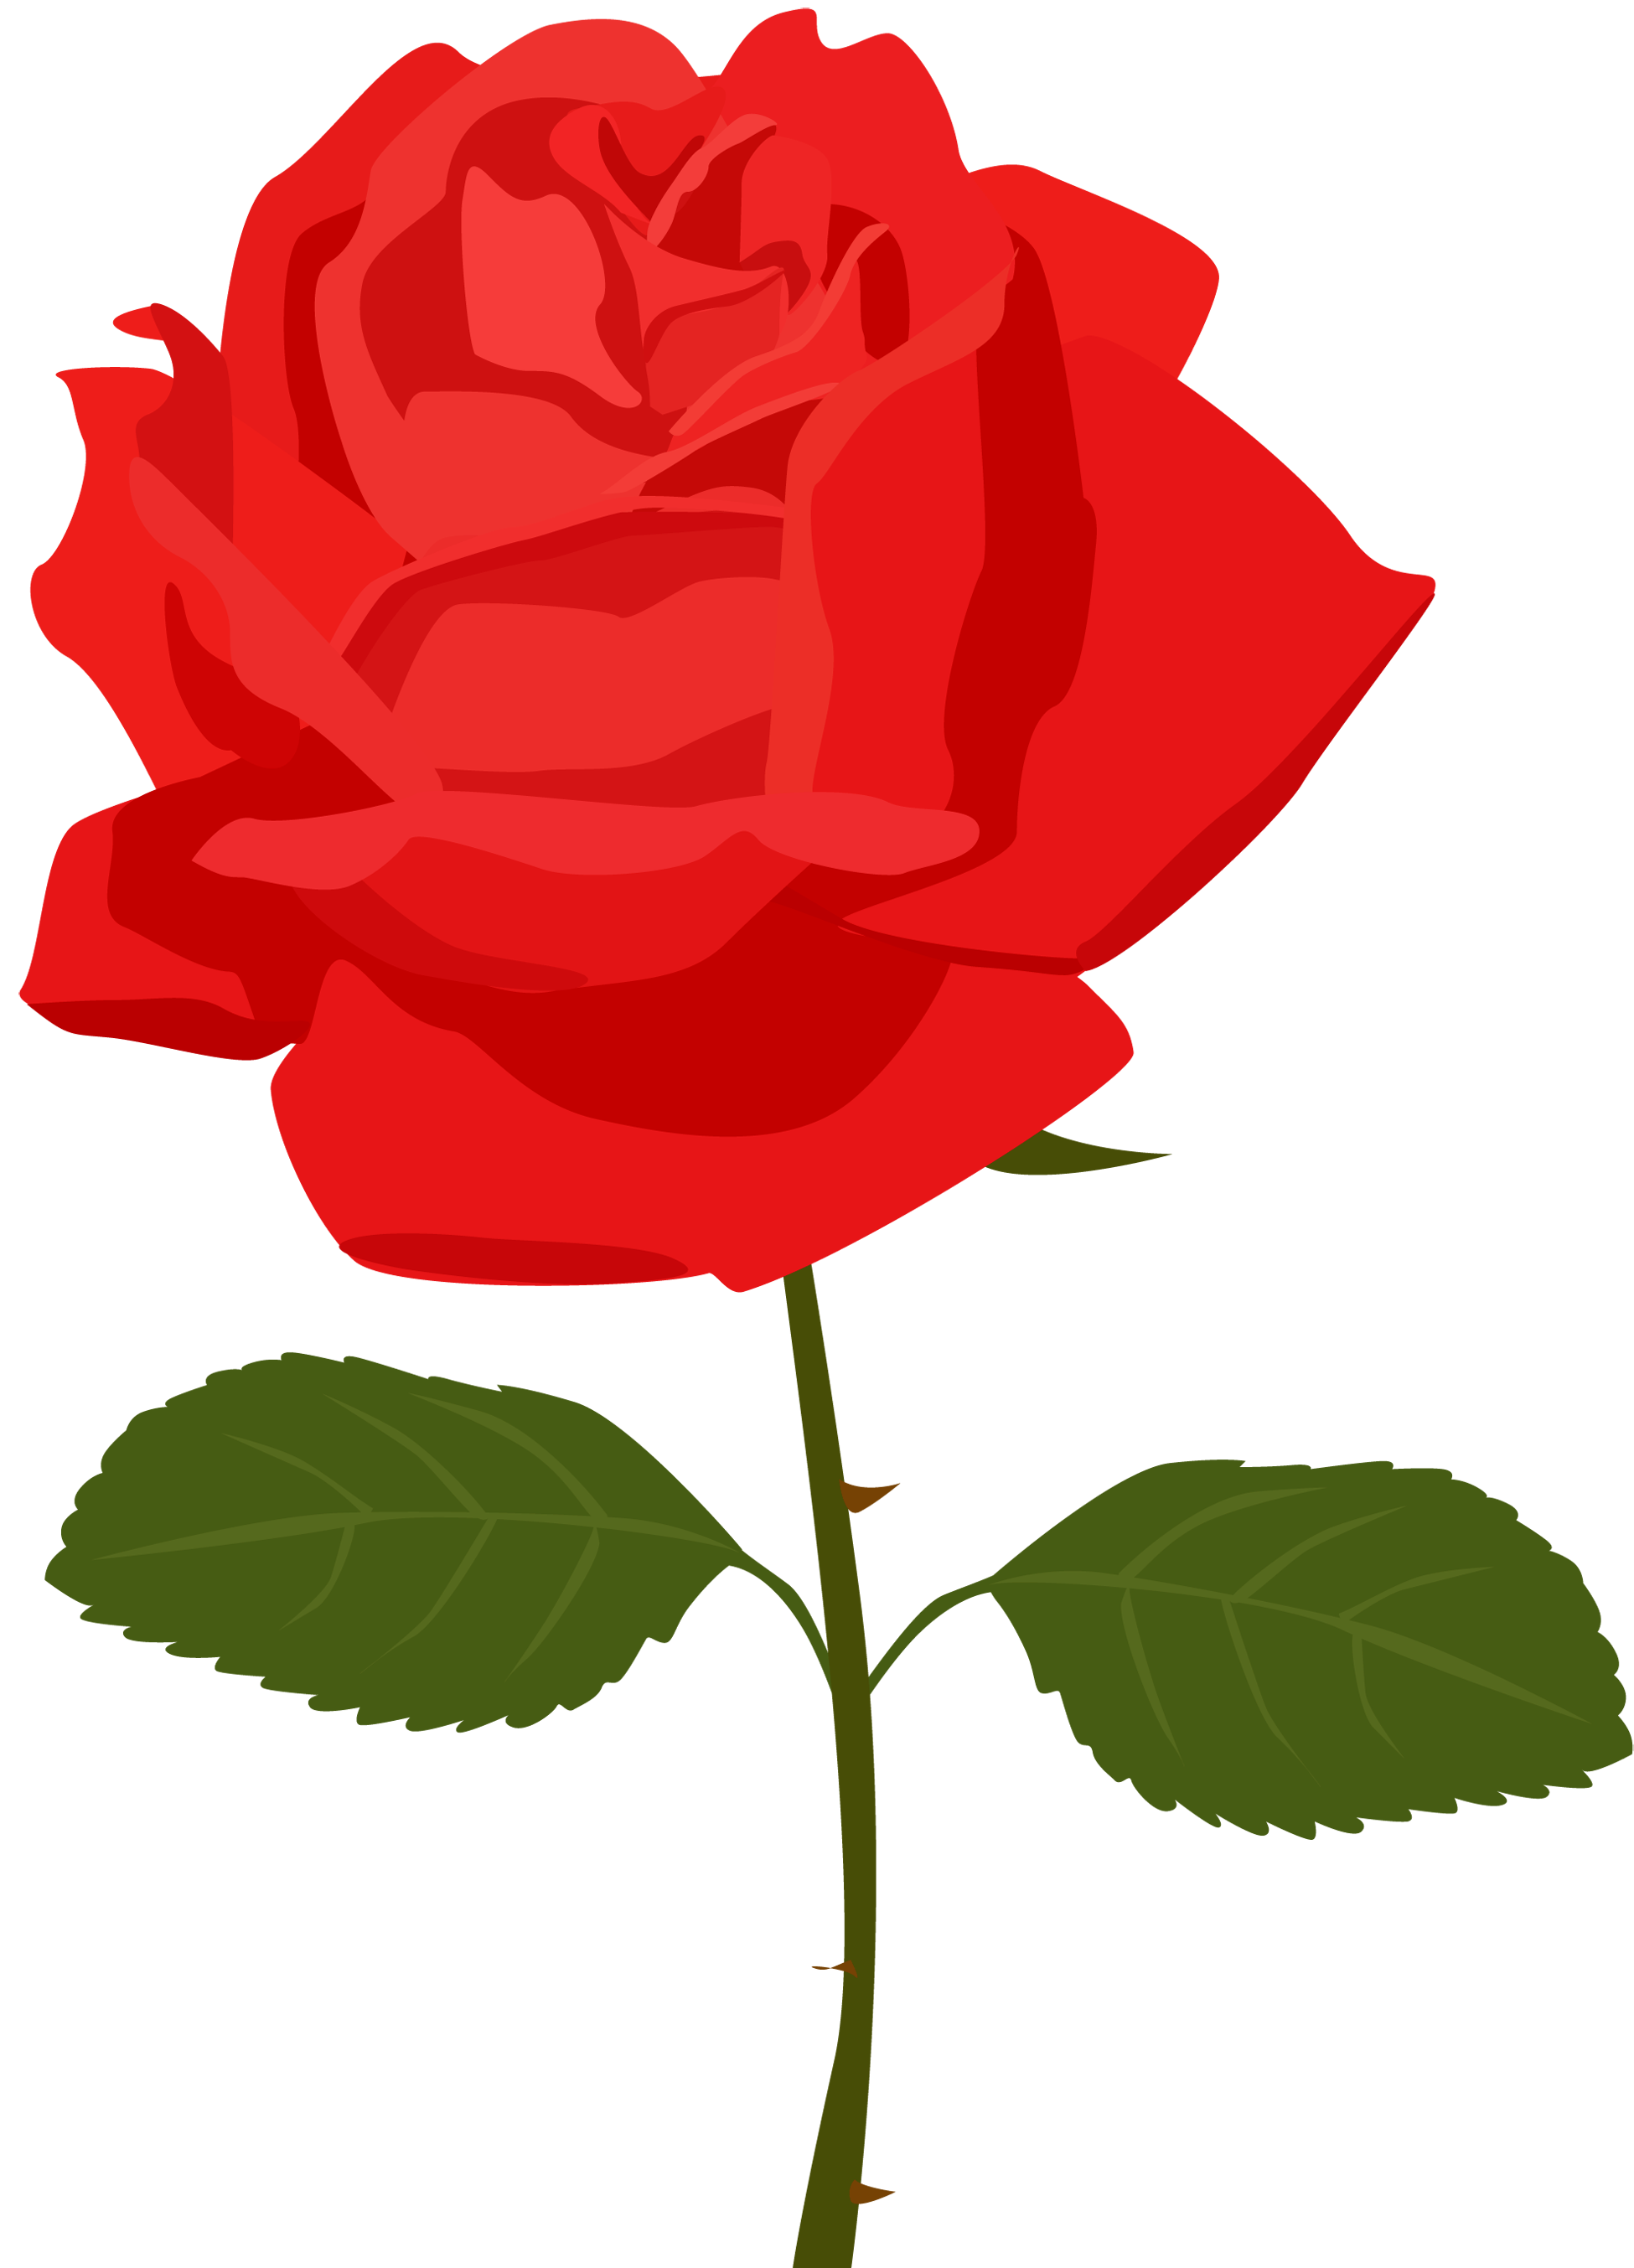 Free Red Rose Clip Art 1